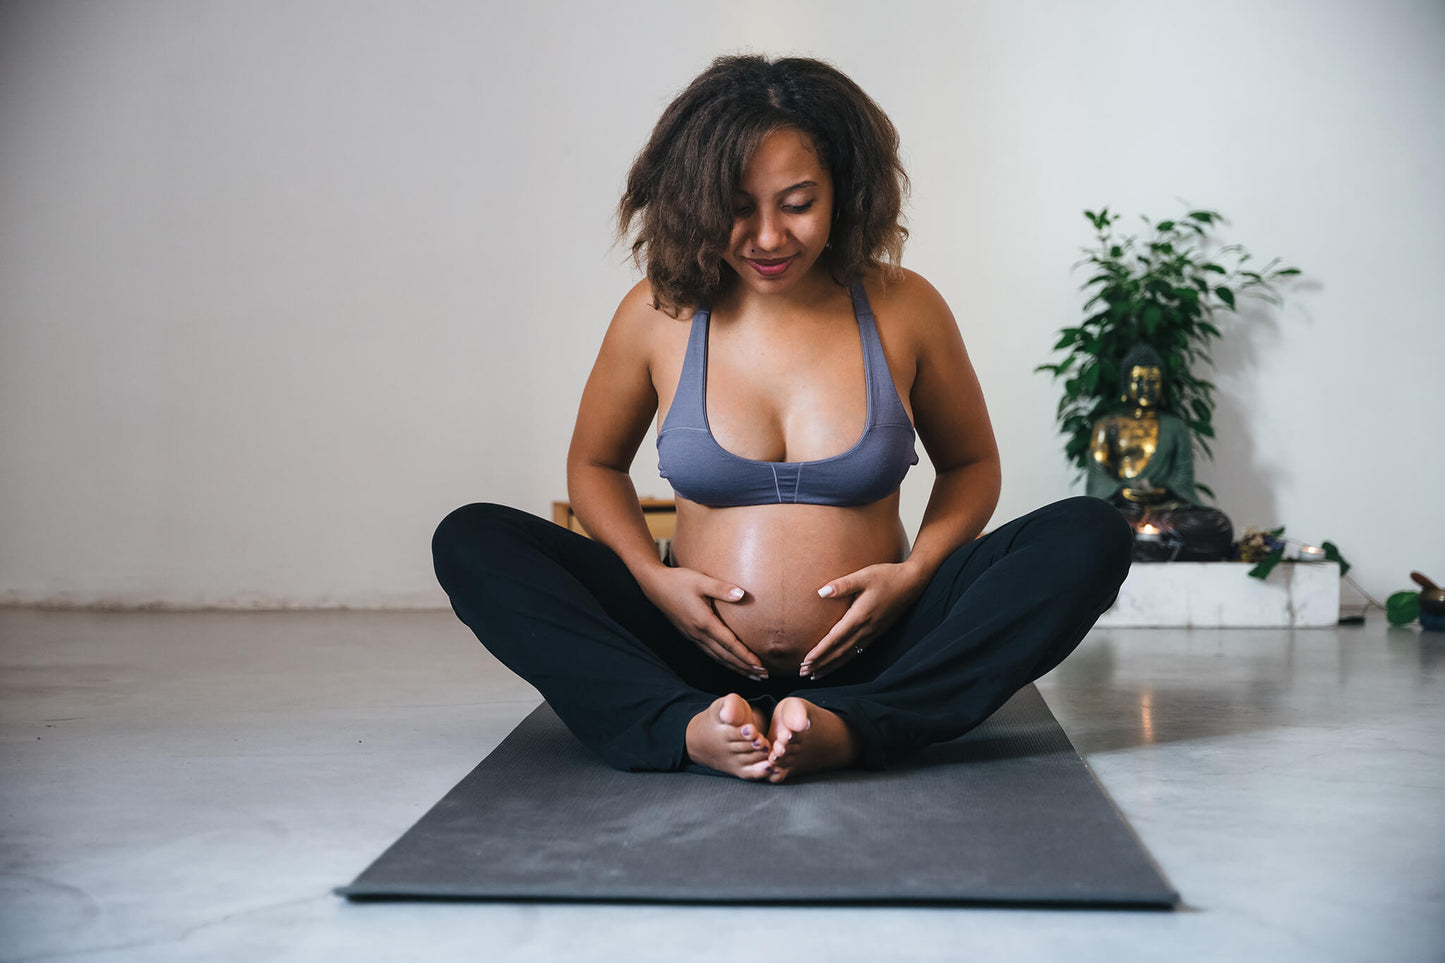 Work out while pregnant: Pregnancy-safe exercises